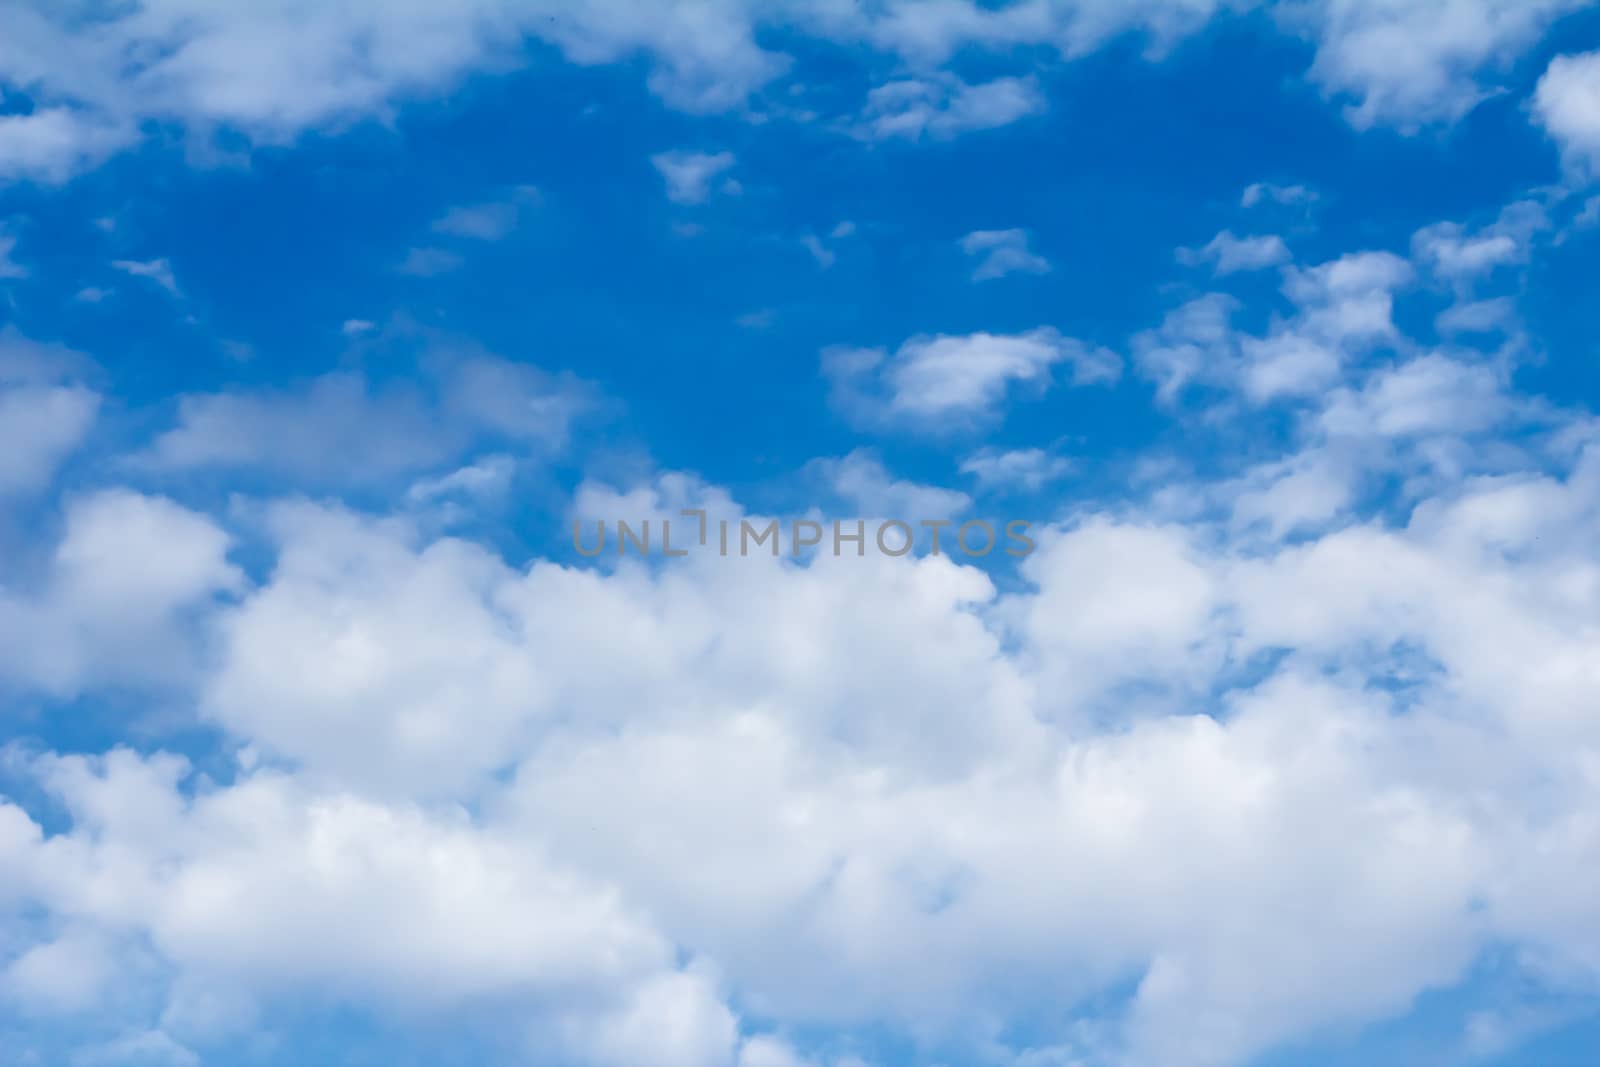 White fluffy clouds float on the blue sky in a clear sunny day.